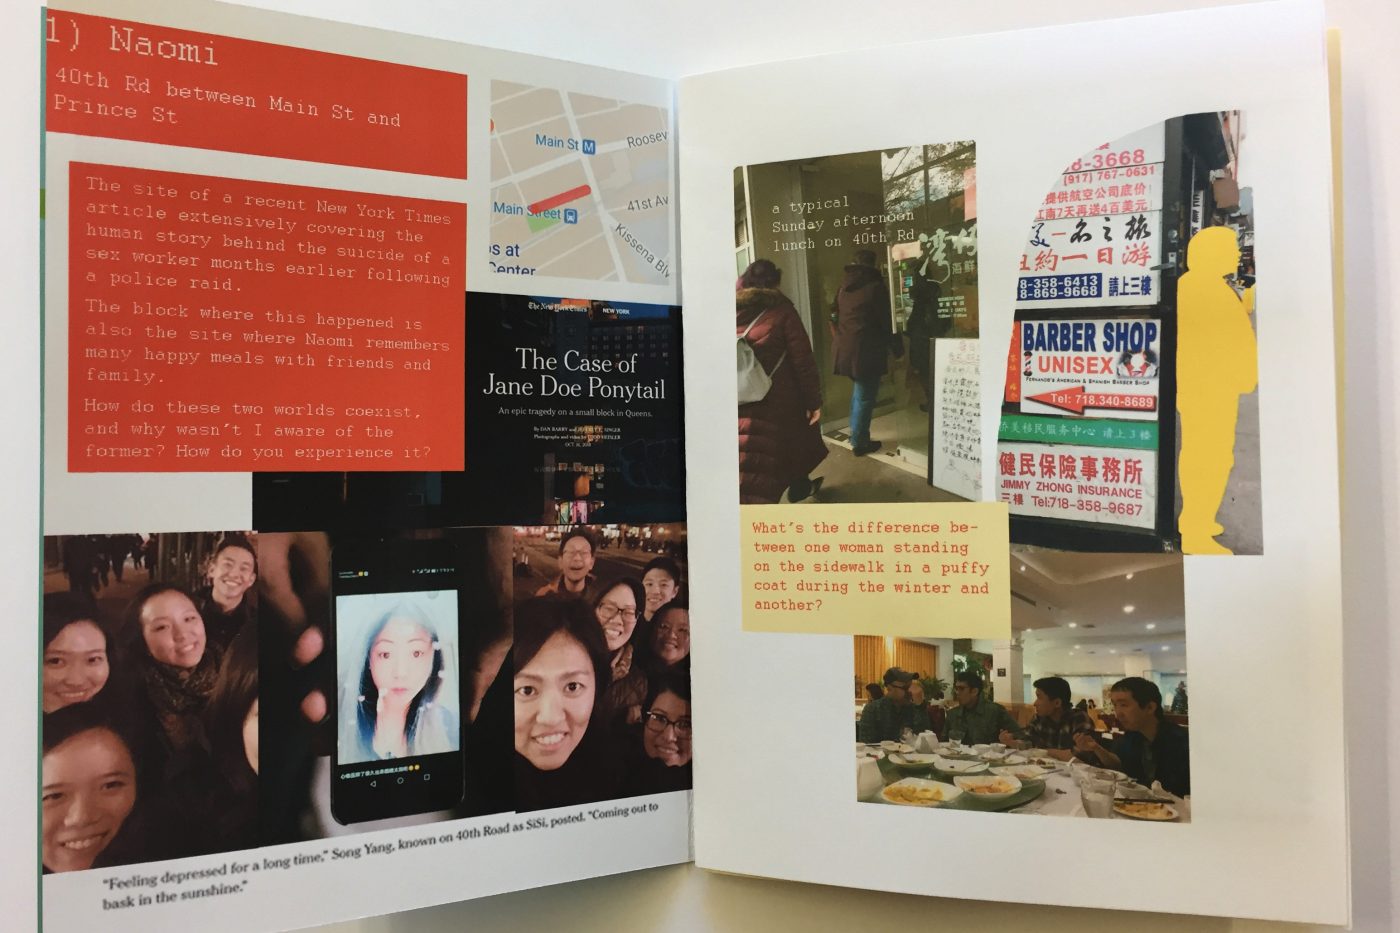 A zine propped open to reveal spread. On the left page are two, orange text blocks with white font, a screenshot from Google Maps, and a group selfie. On the right page is a yellow text block with orange text, a photo of a group of men at a dinner table, people walking through a door, and a photo of street signs with a yellow silhouette of a person collages into the shot.